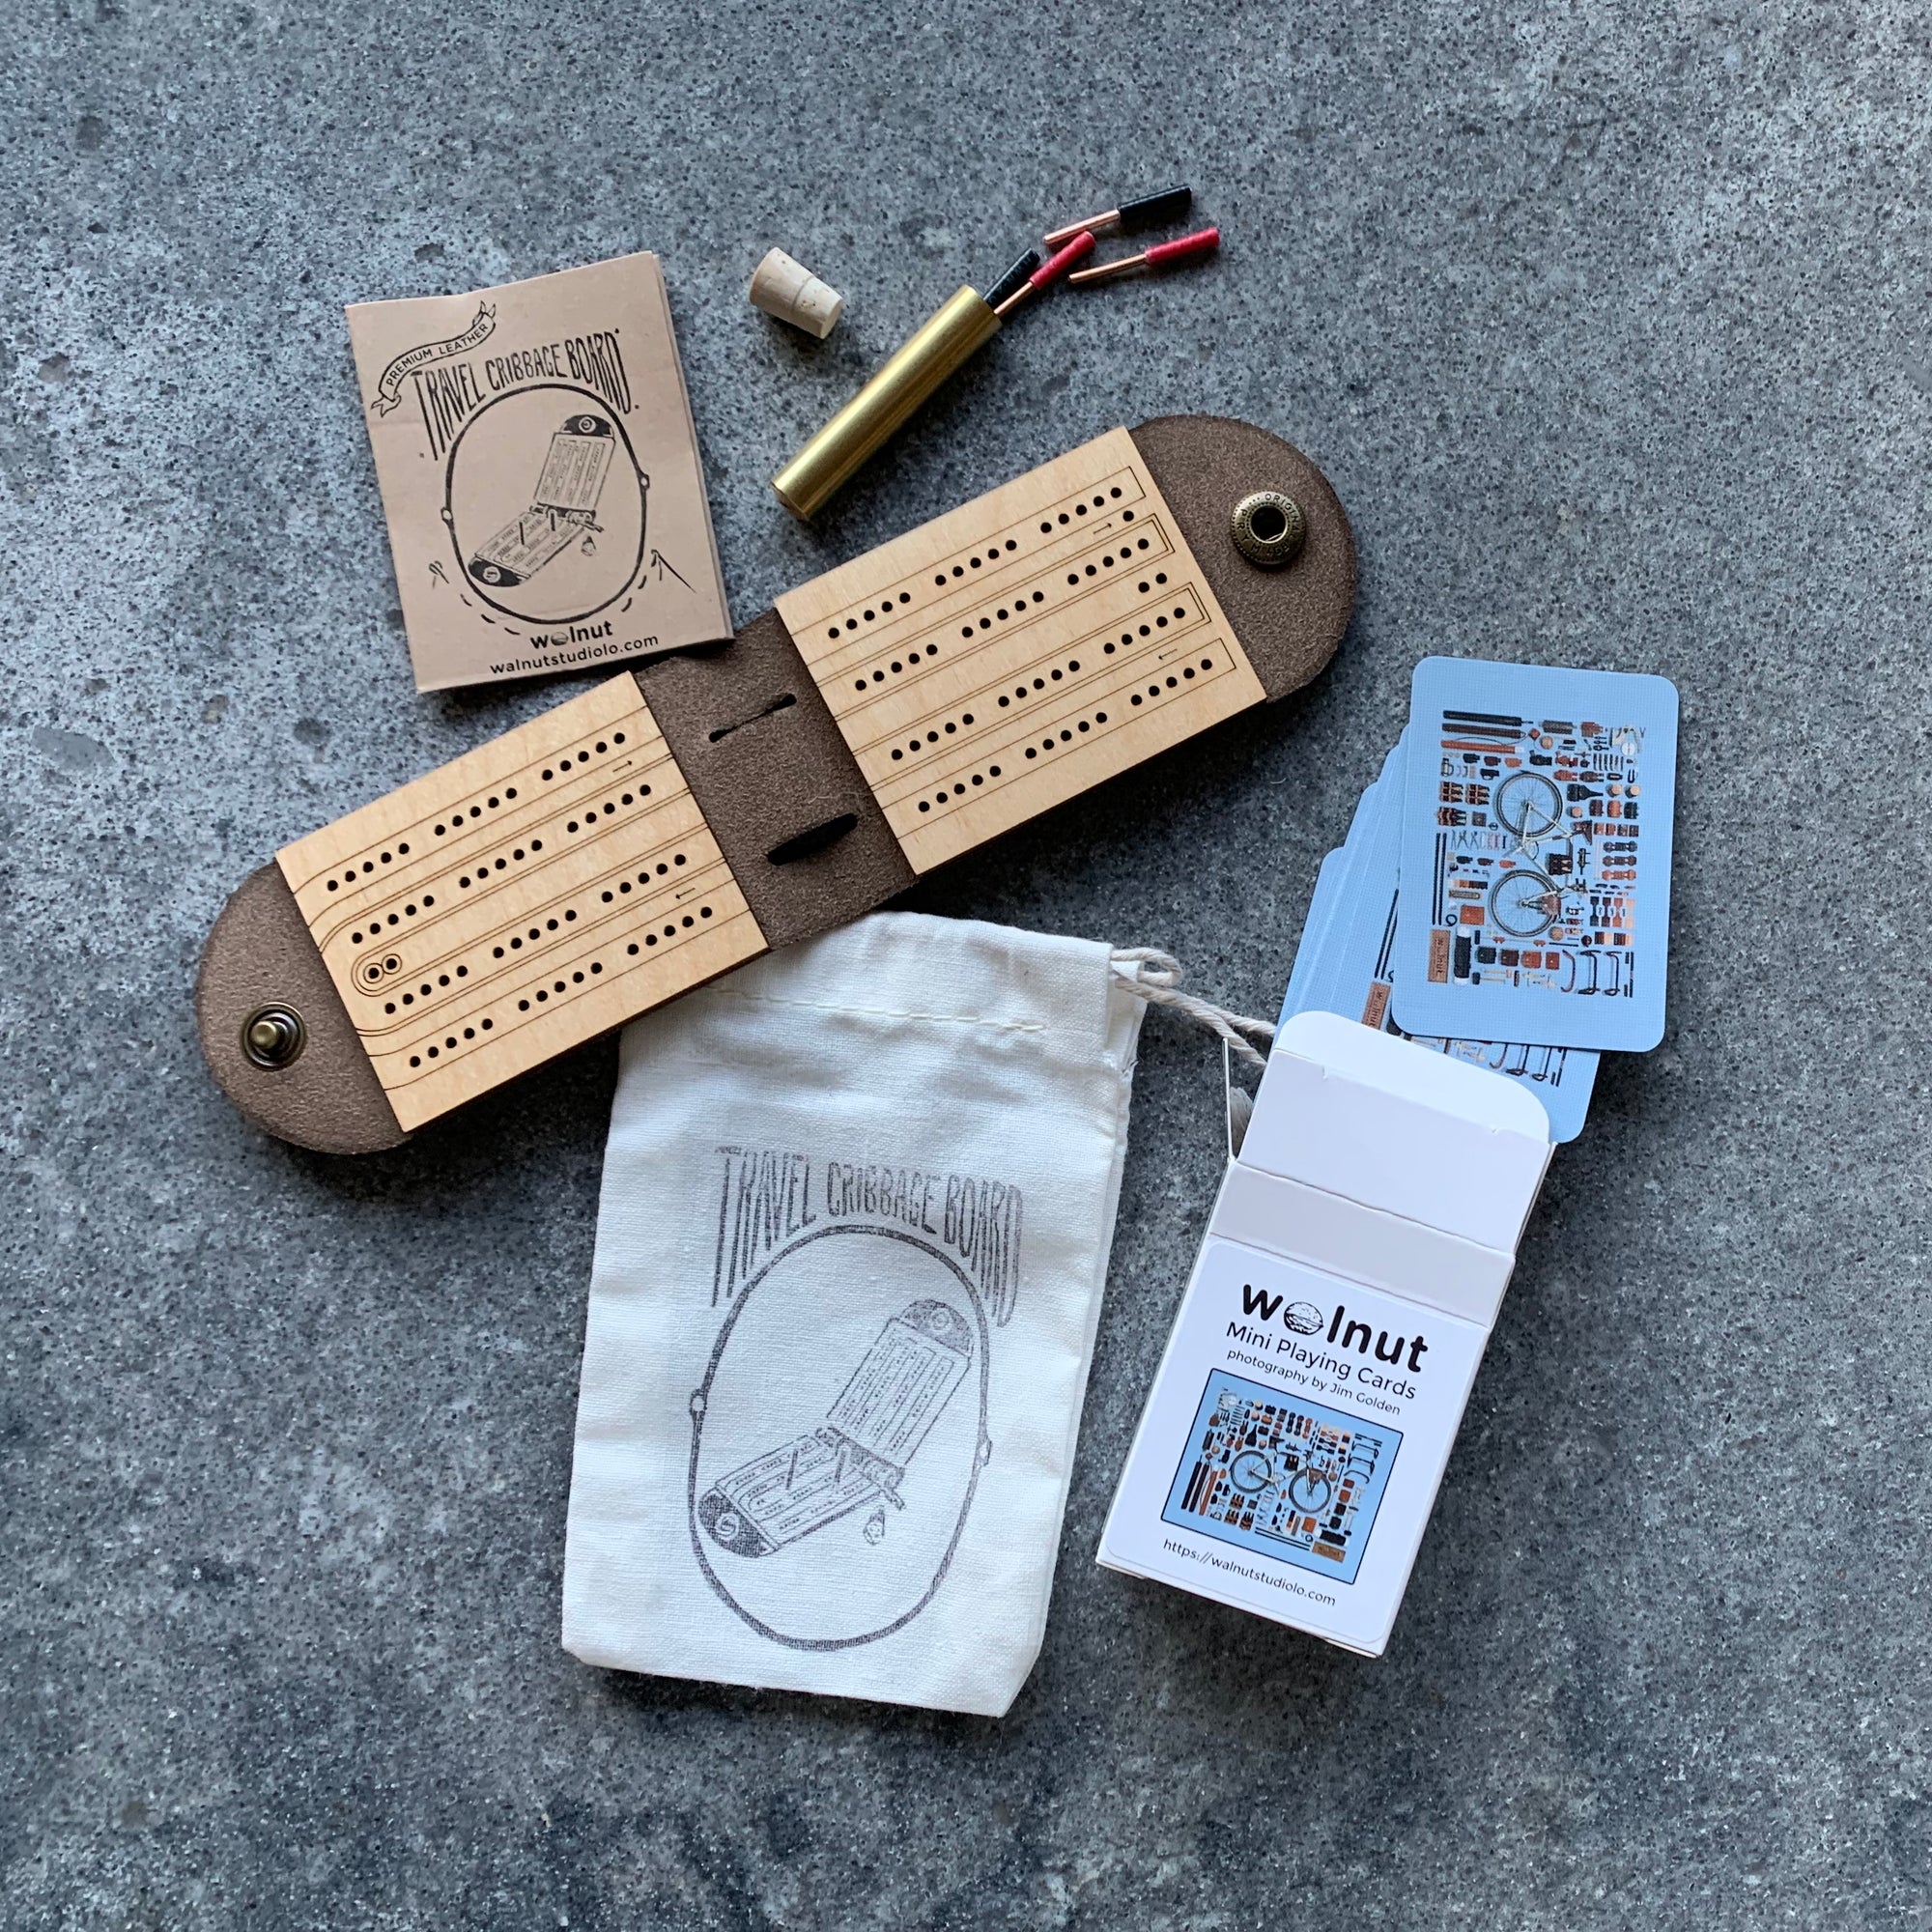 Introducing the "Ultralight" Travel Cribbage Gift Set